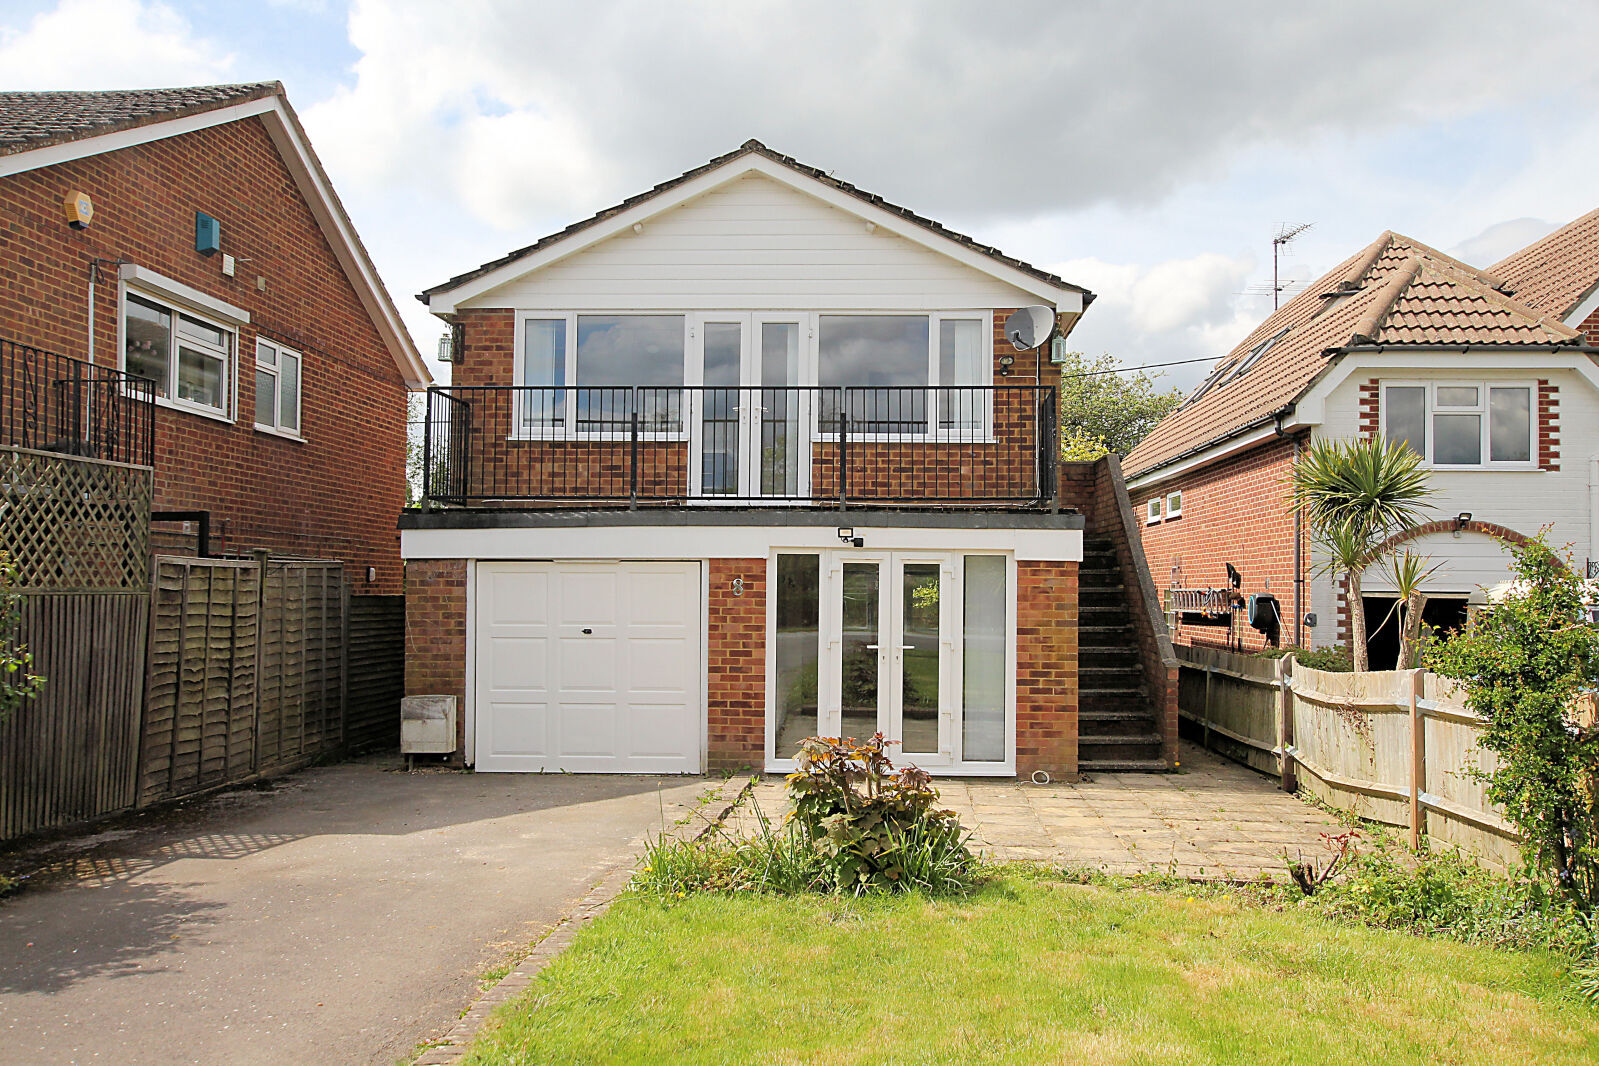 2 bedroom detached house to rent, Available now River Gardens, Purley On Thames, RG8, main image